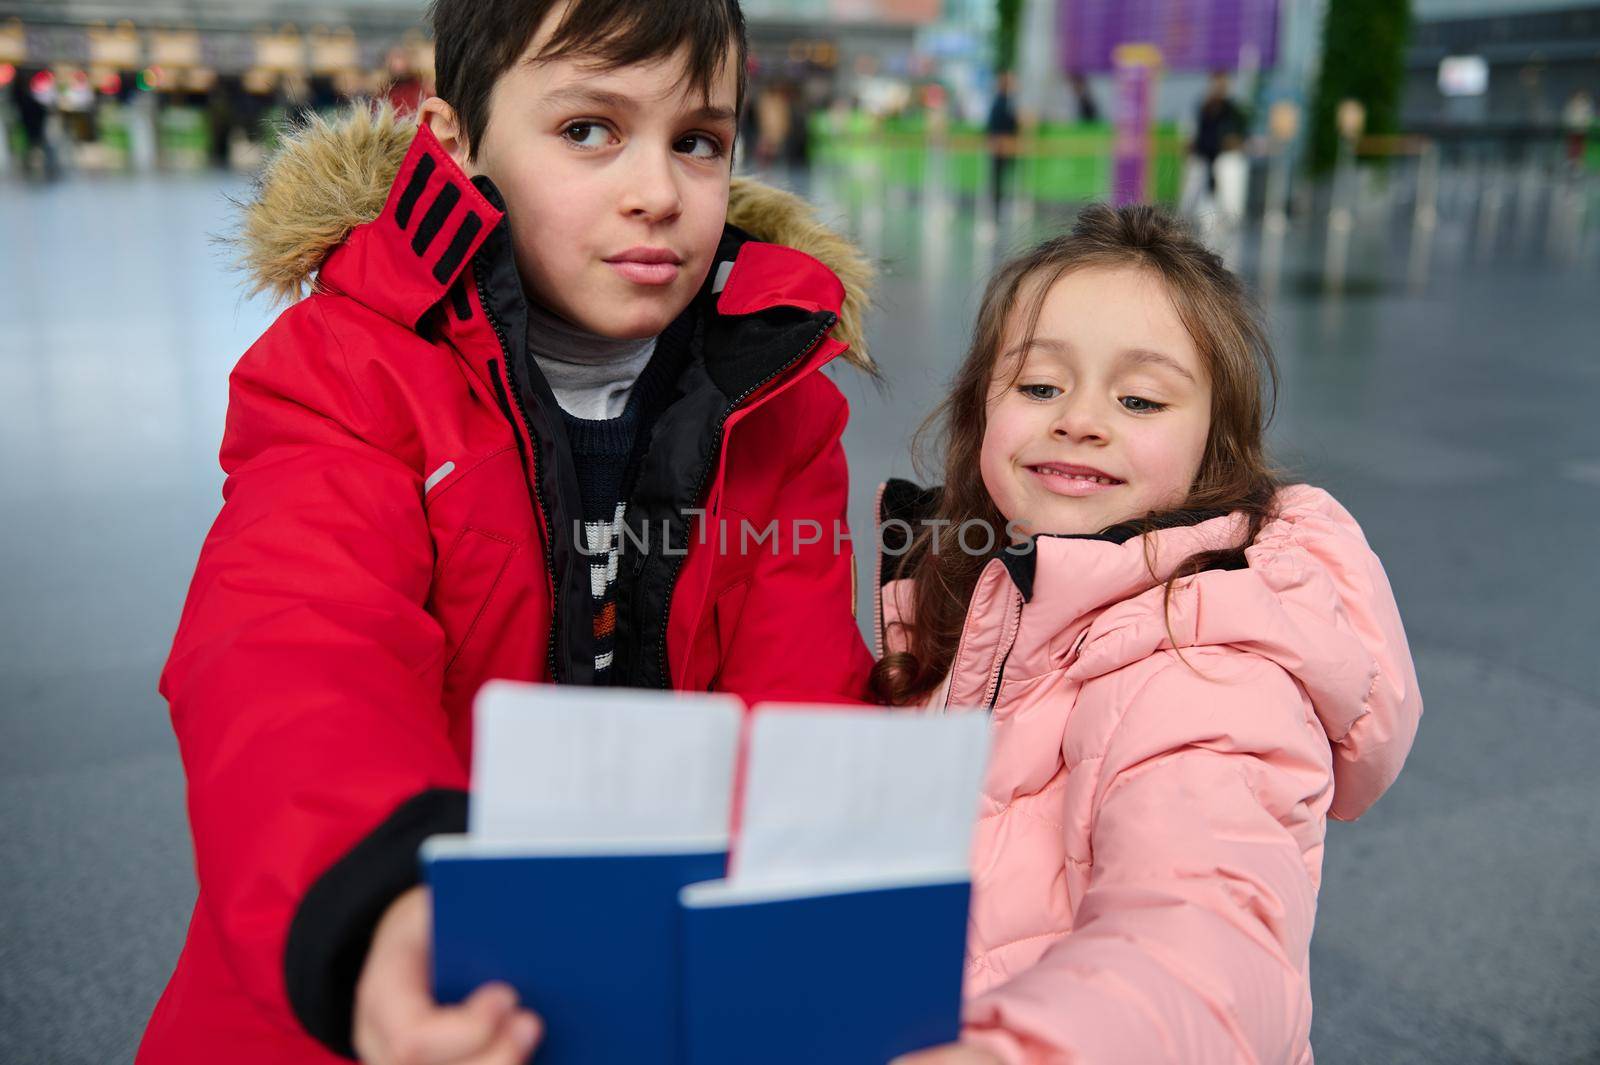 Adorable Caucasian kids- boy and girl, siblings holding boarding pass and Identity document in outstretched hands while waiting for check-in flight in the departure hall of an international airport